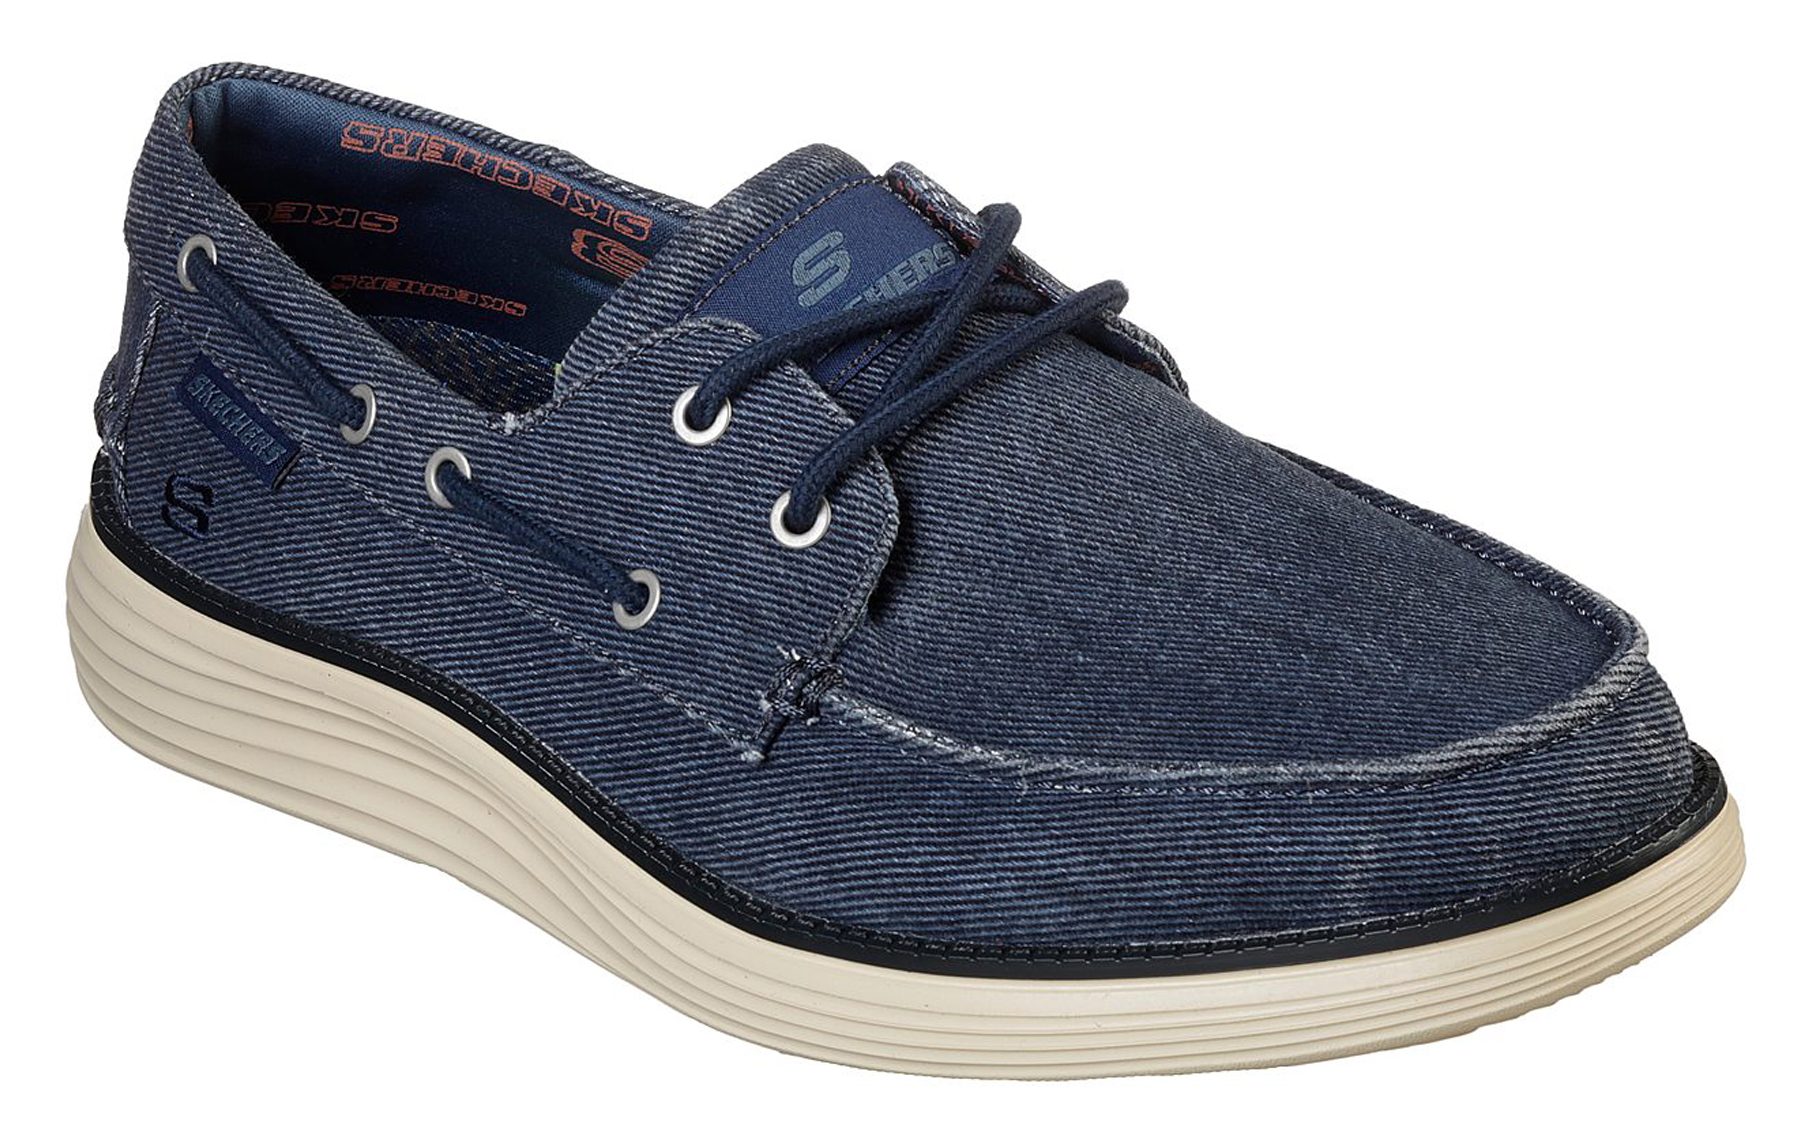 Skechers Status 2.0 - Lorano Navy 65908 NVY - Casual Shoes - Humphries ...